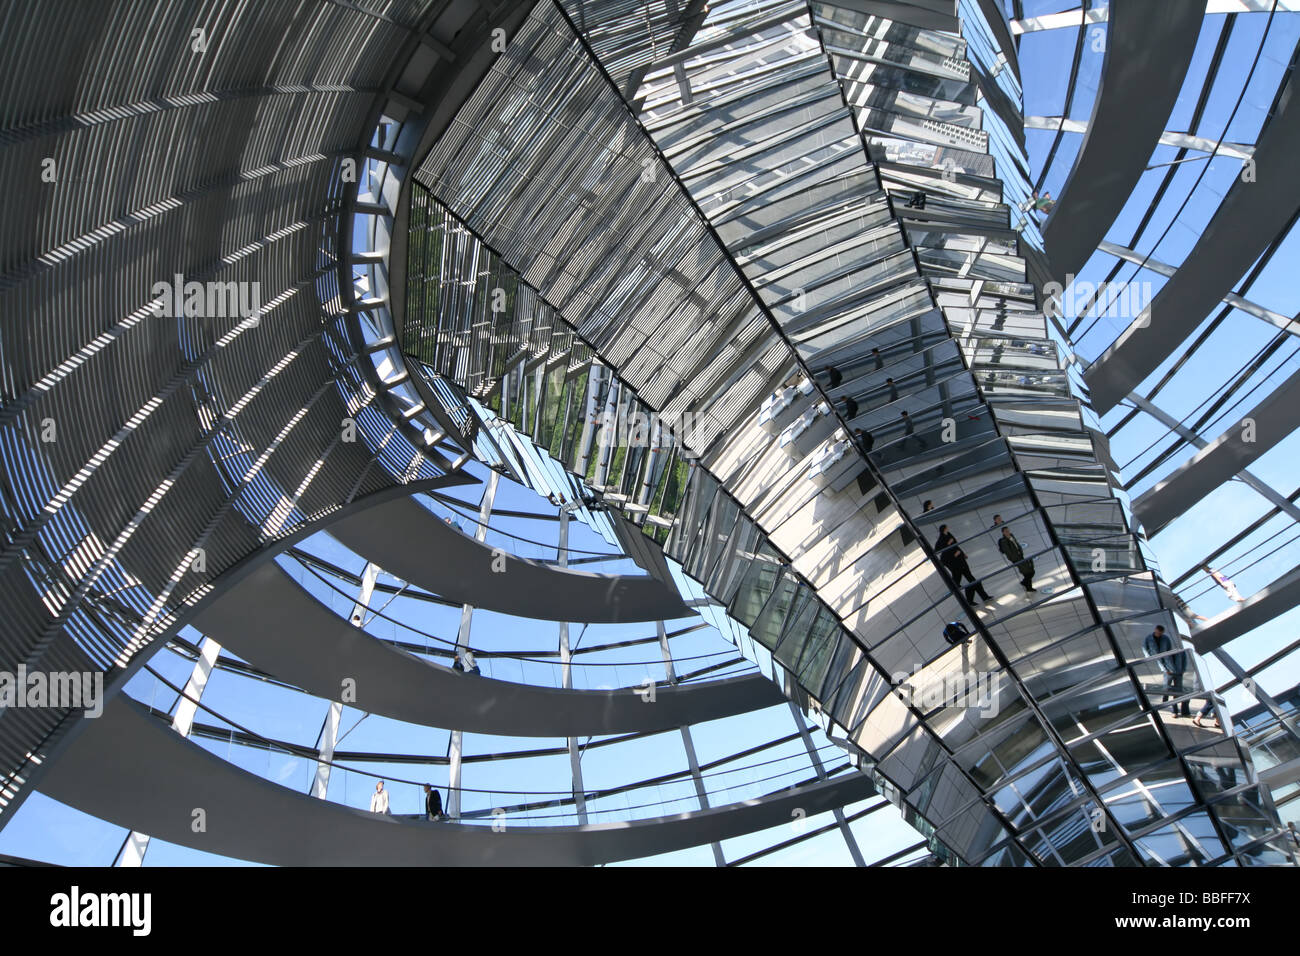 Modern dome of Reichstag in Berlin. Reichstag is Germany's parliament building Stock Photo